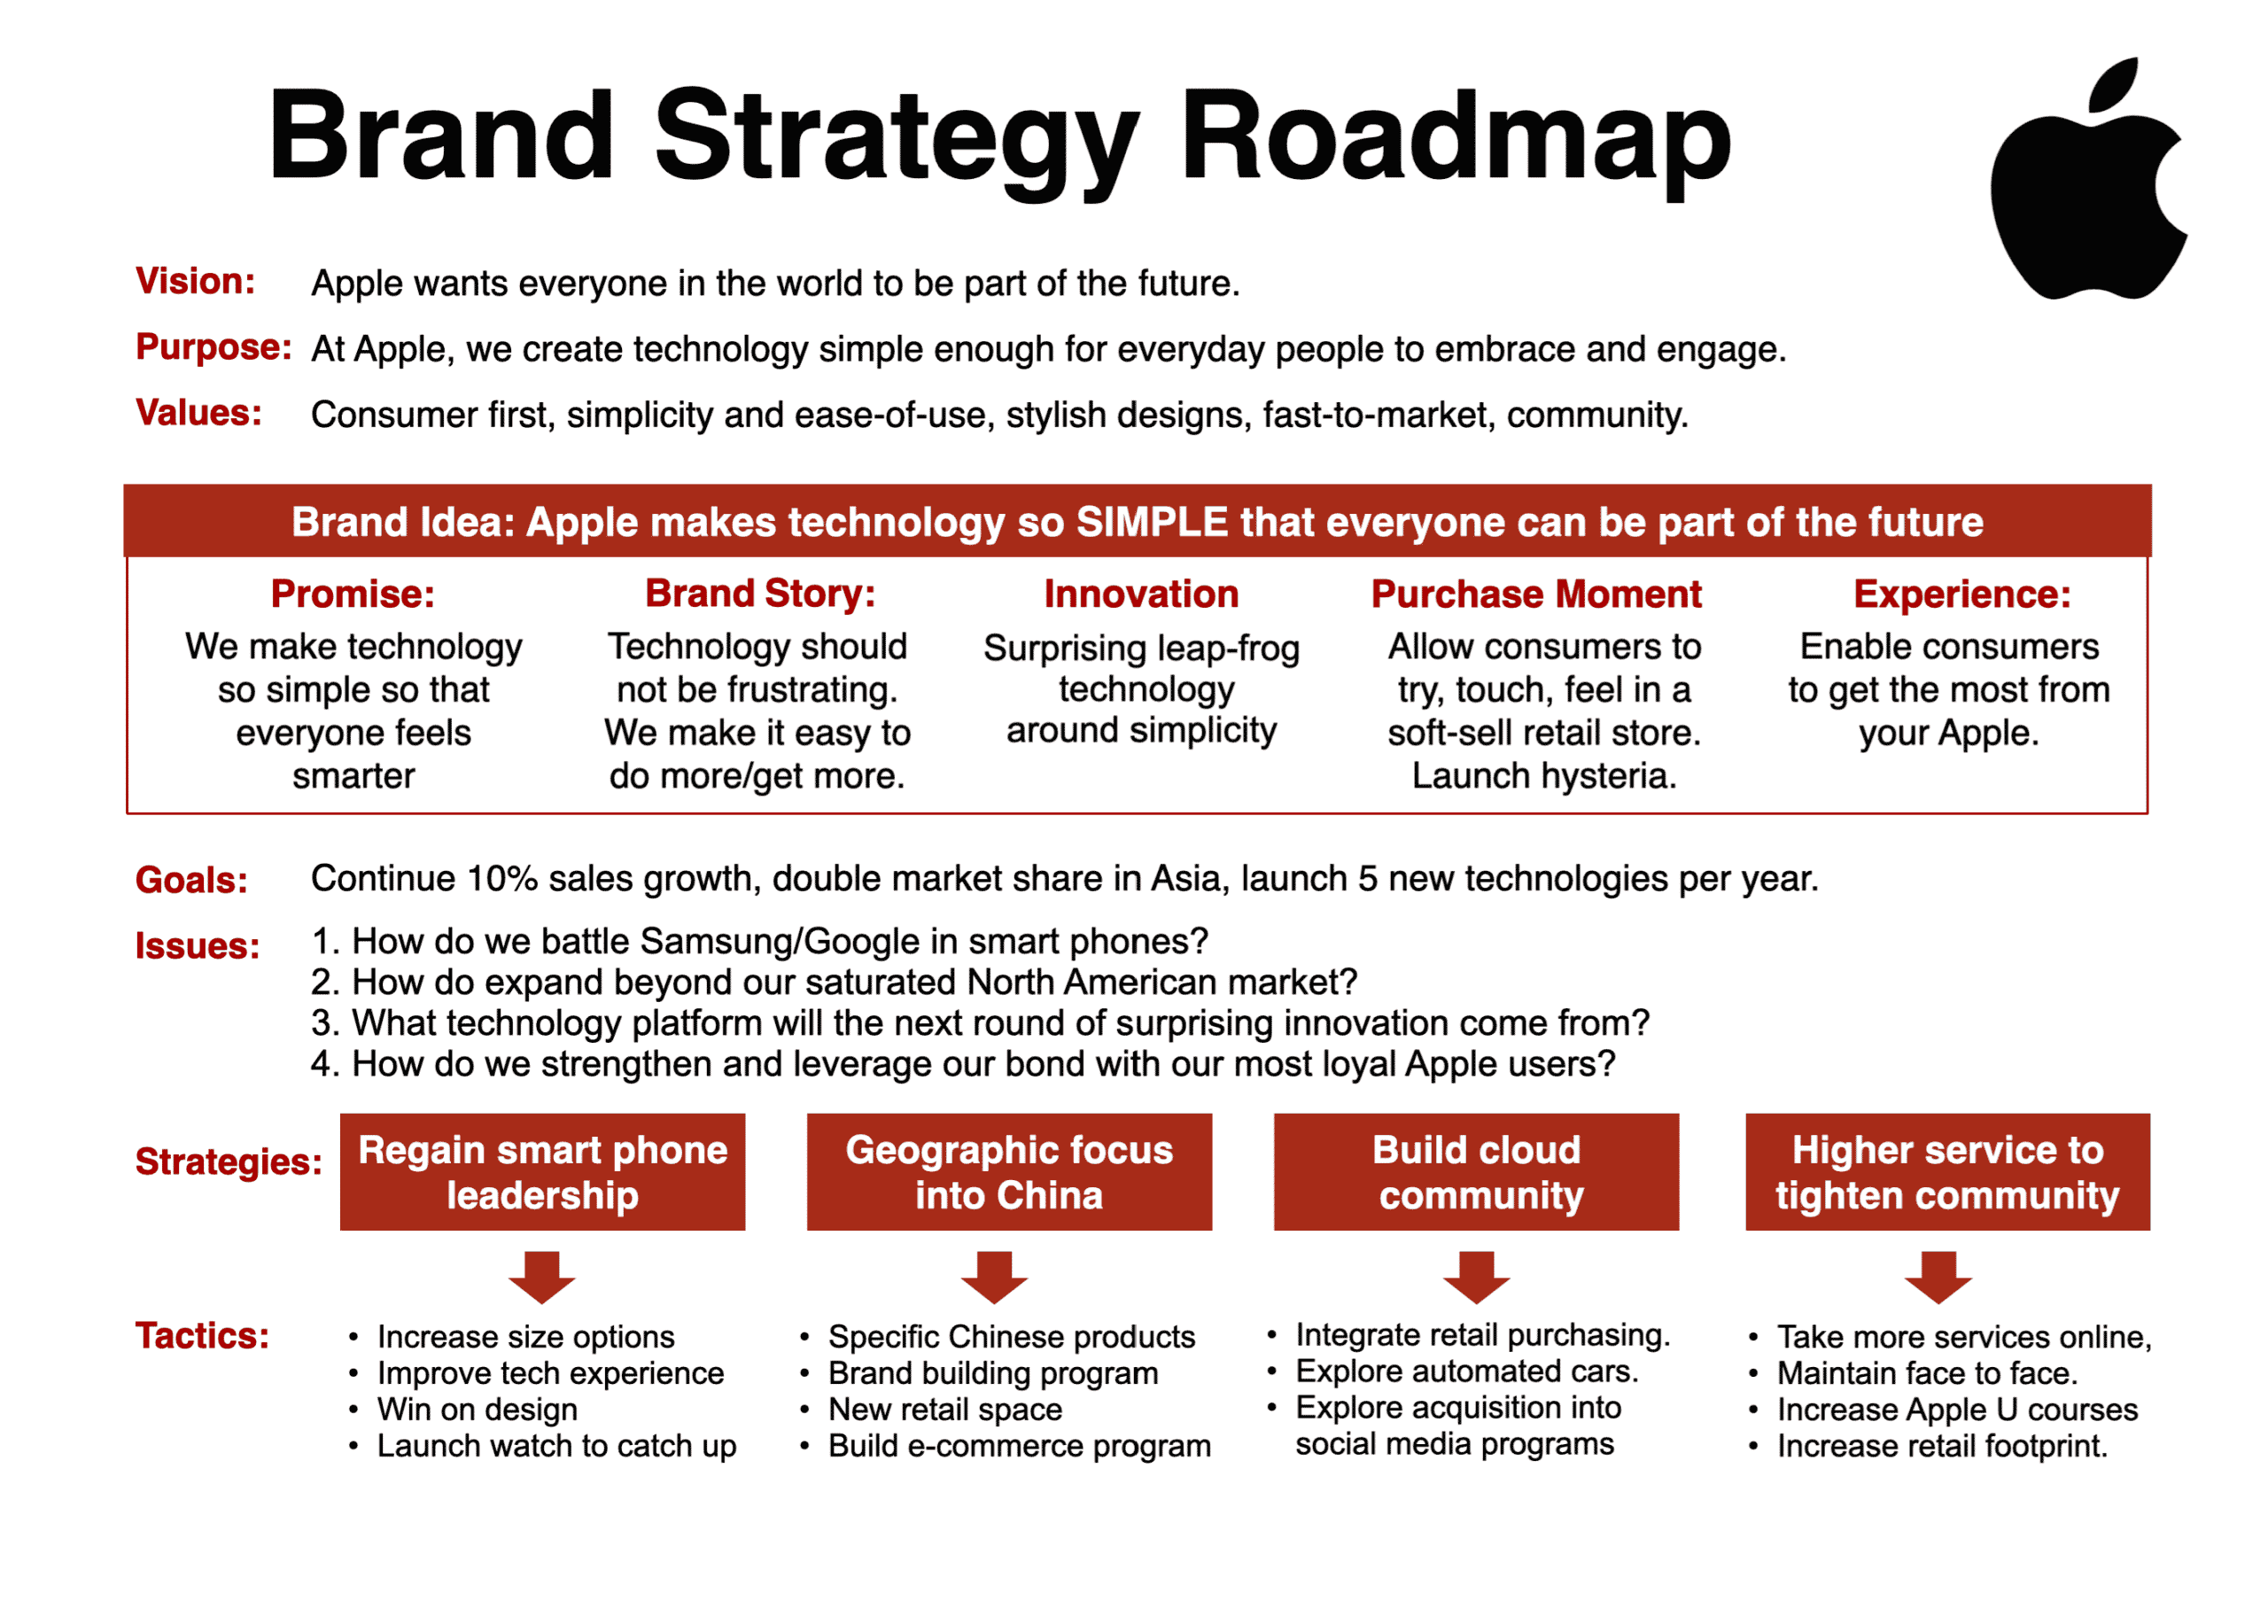 Brand Strategy Roadmap for Apple and Steve Jobs